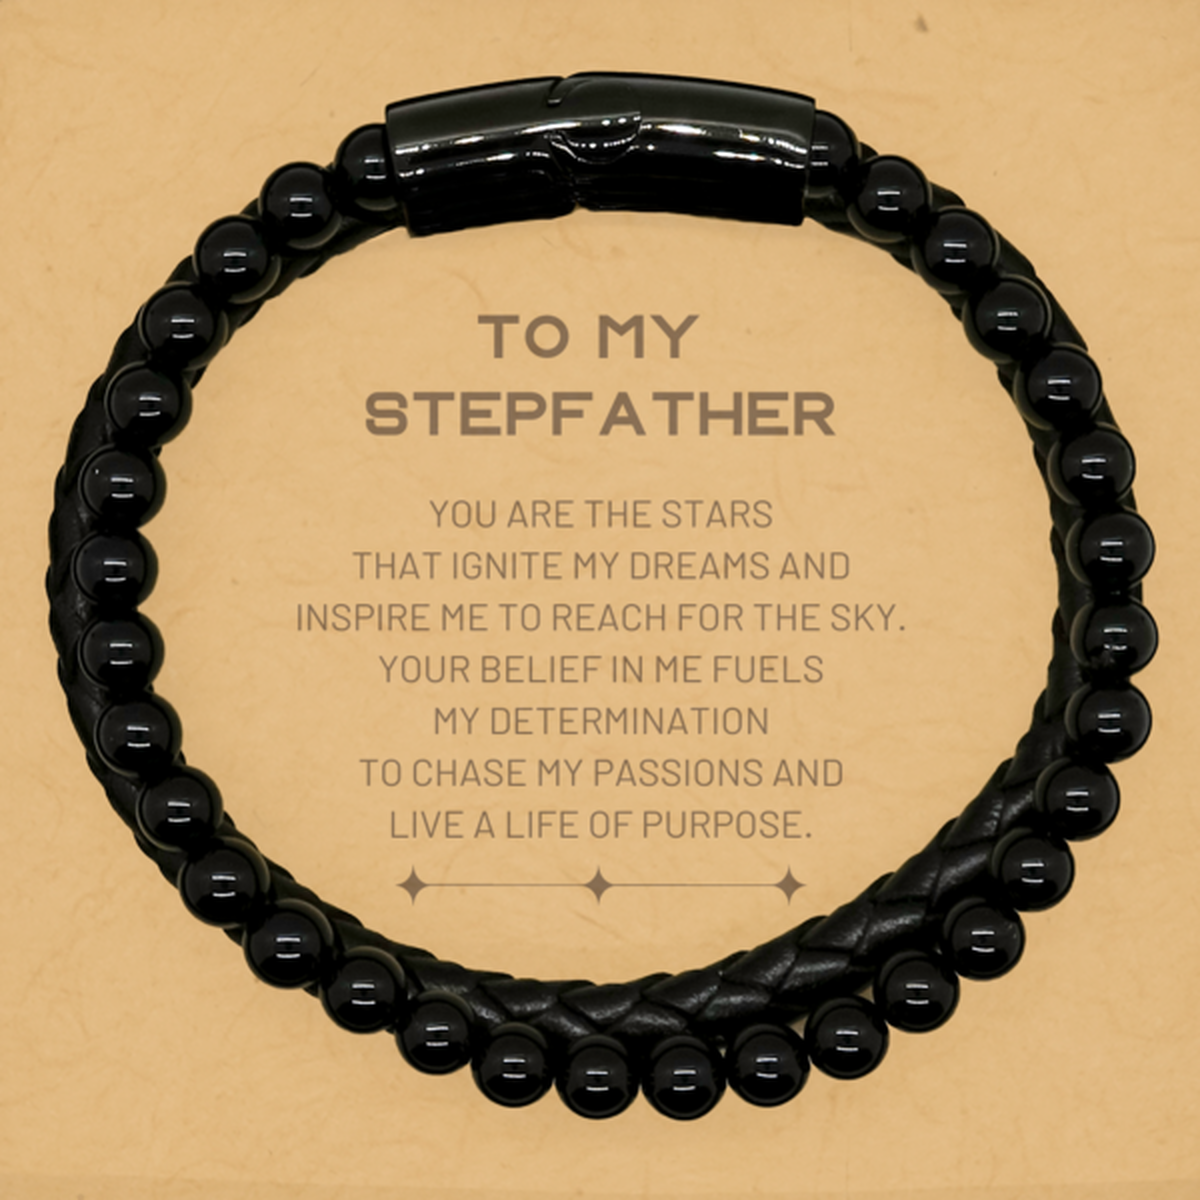 To My Stepfather Stone Leather Bracelets, You are the stars that ignite my dreams and inspire me to reach for the sky, Birthday Unique Gifts For Stepfather, Thank You Gifts For Stepfather